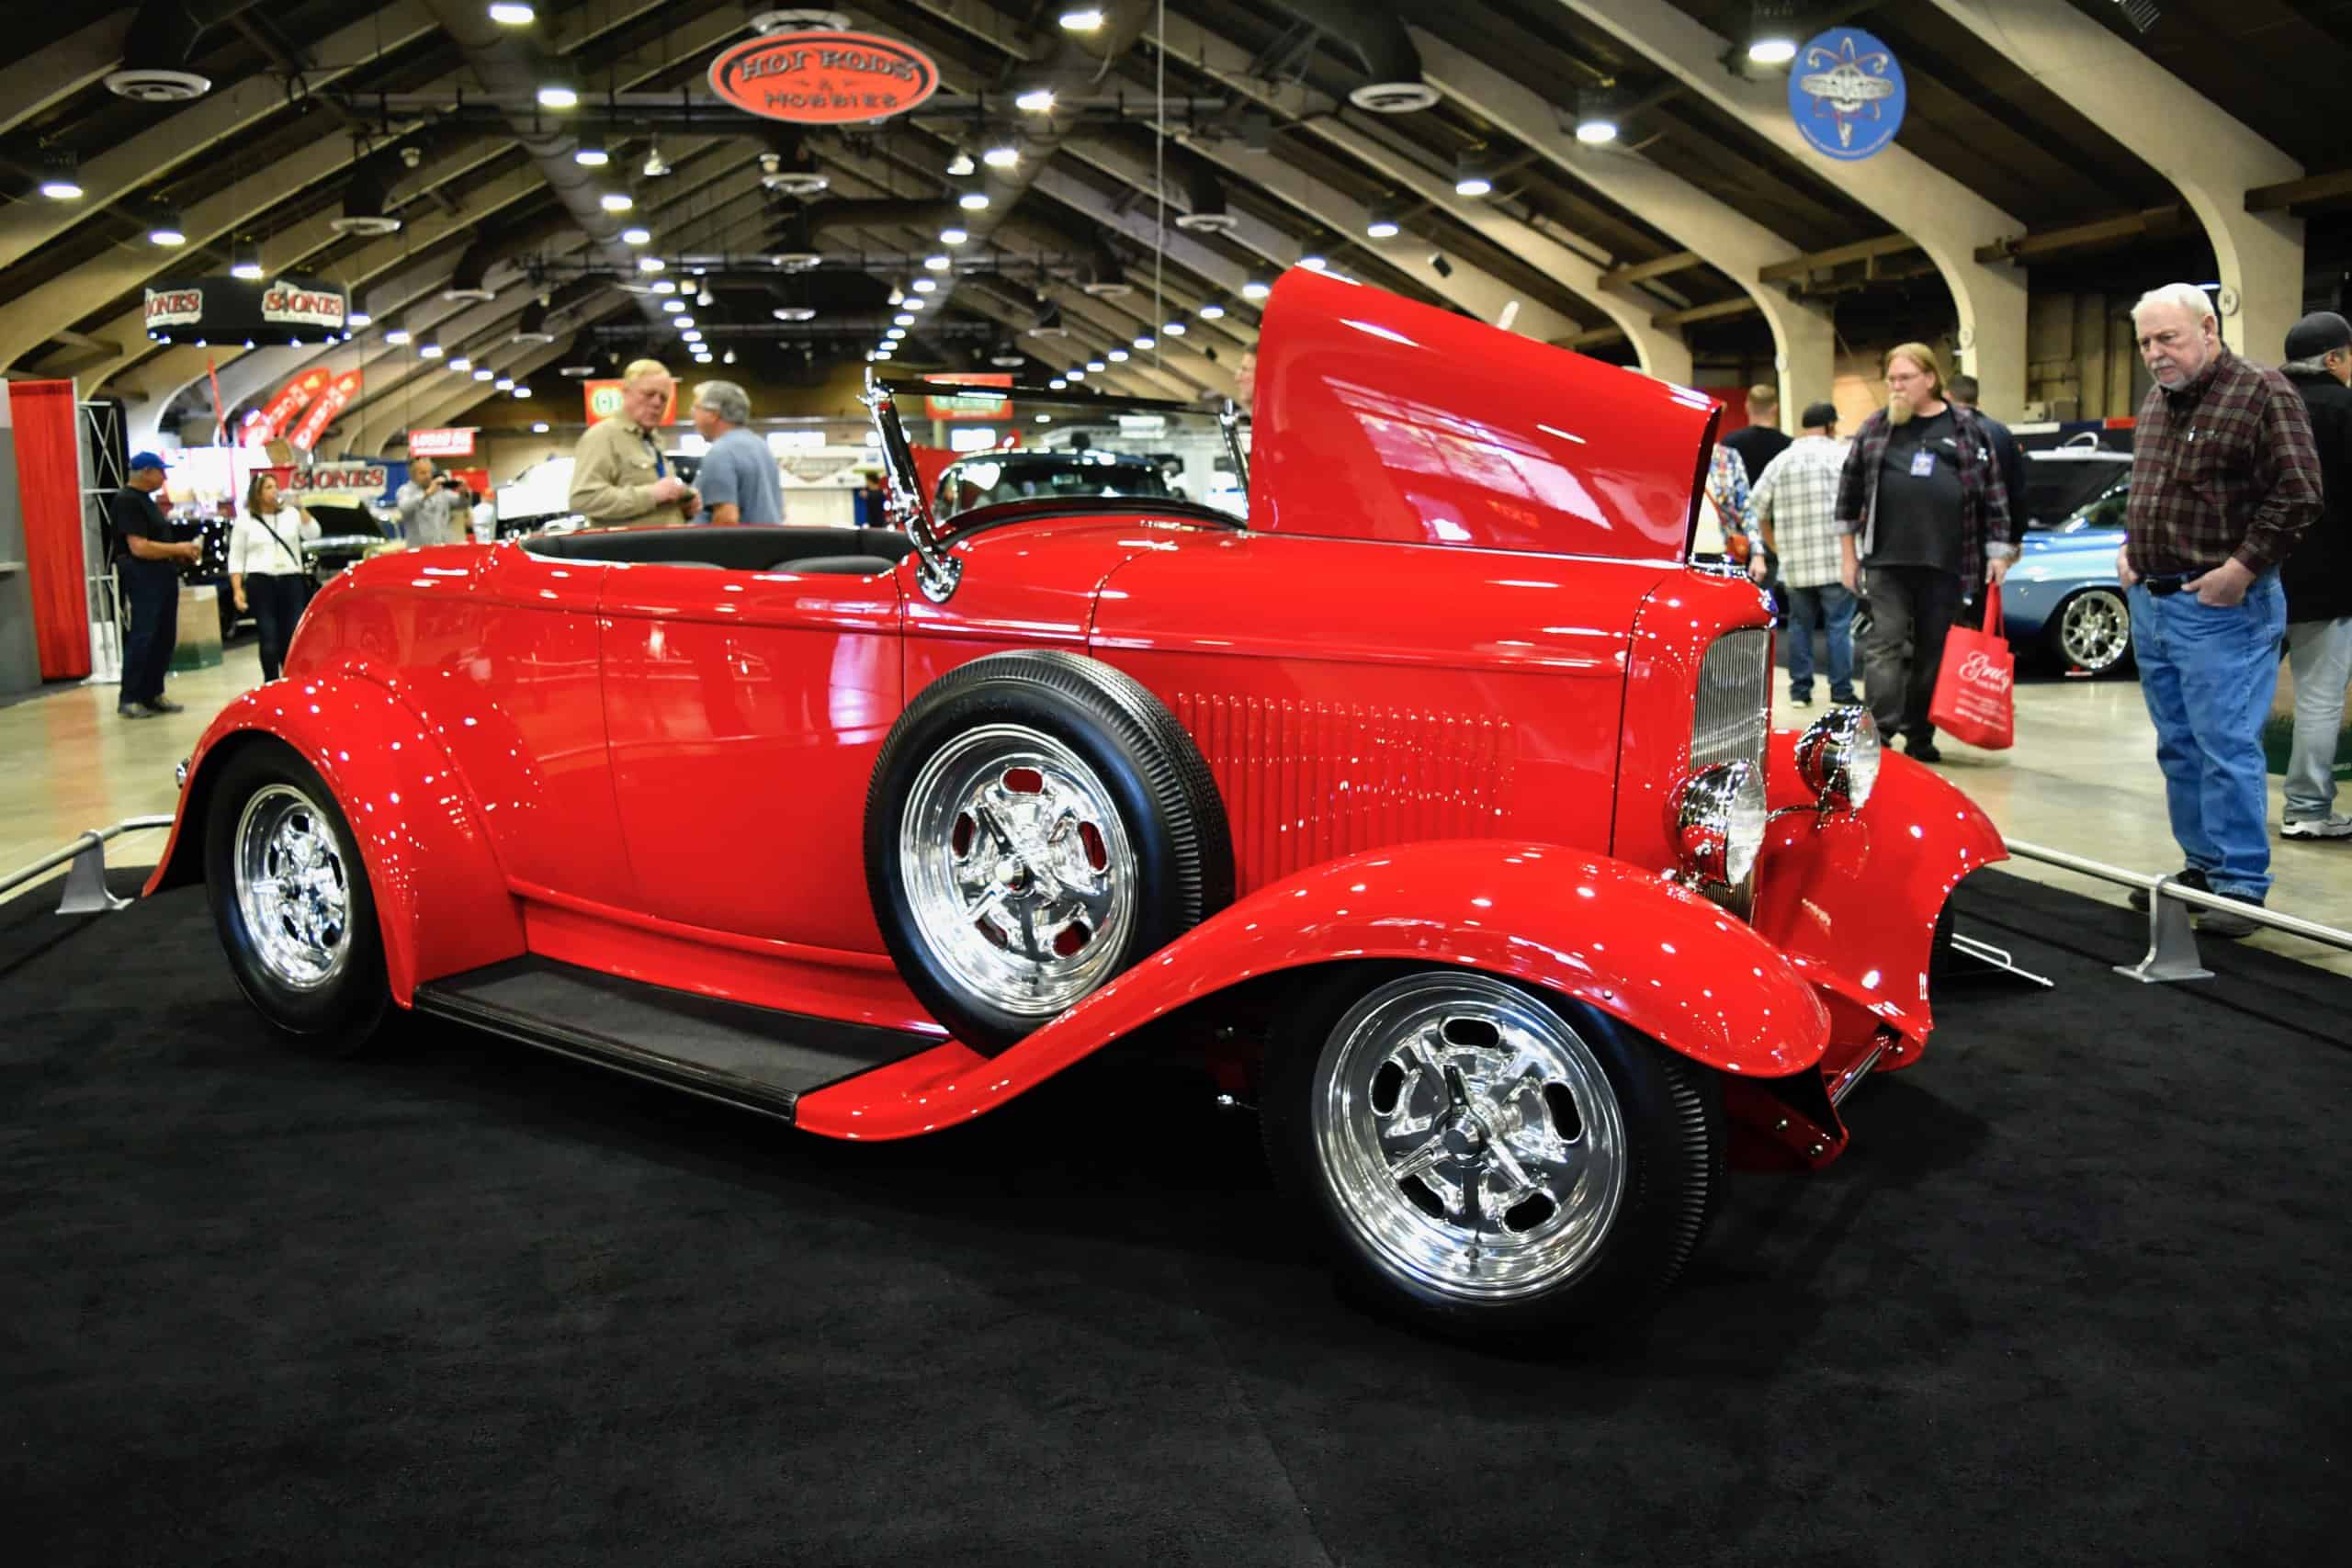 Hot rod show, ’32 Ford takes America’s Most Beautiful Roadster honors, ClassicCars.com Journal